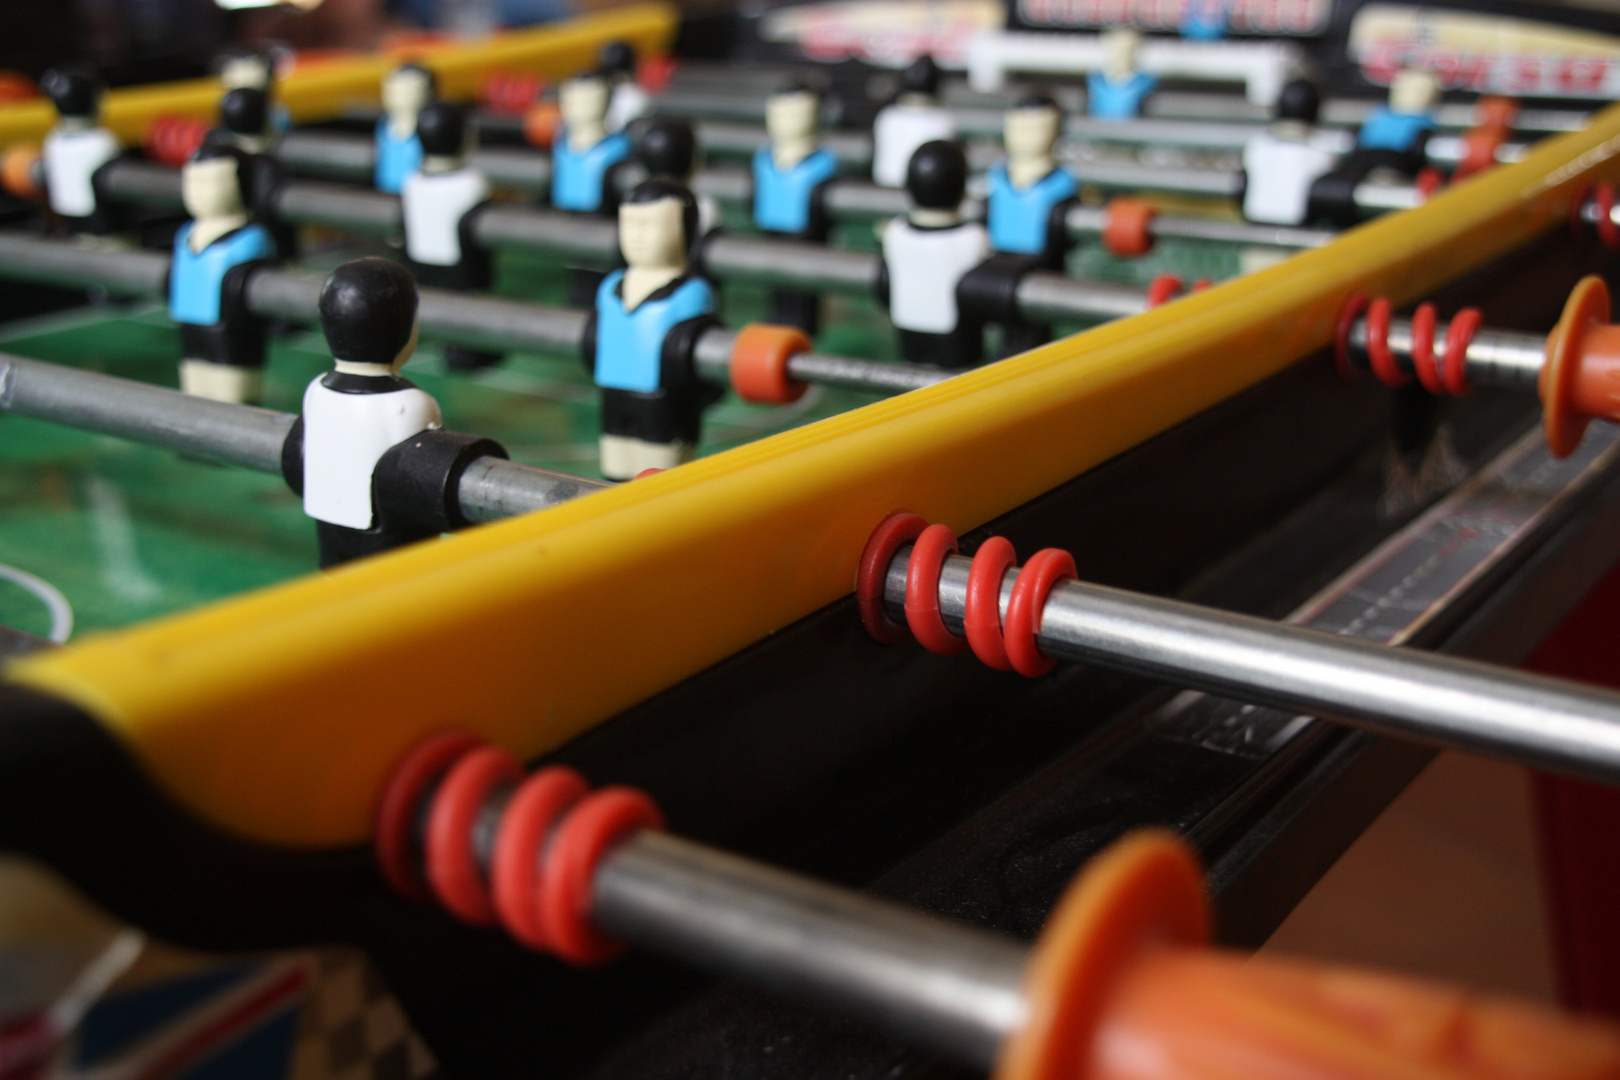 welcome to the world of (table) football